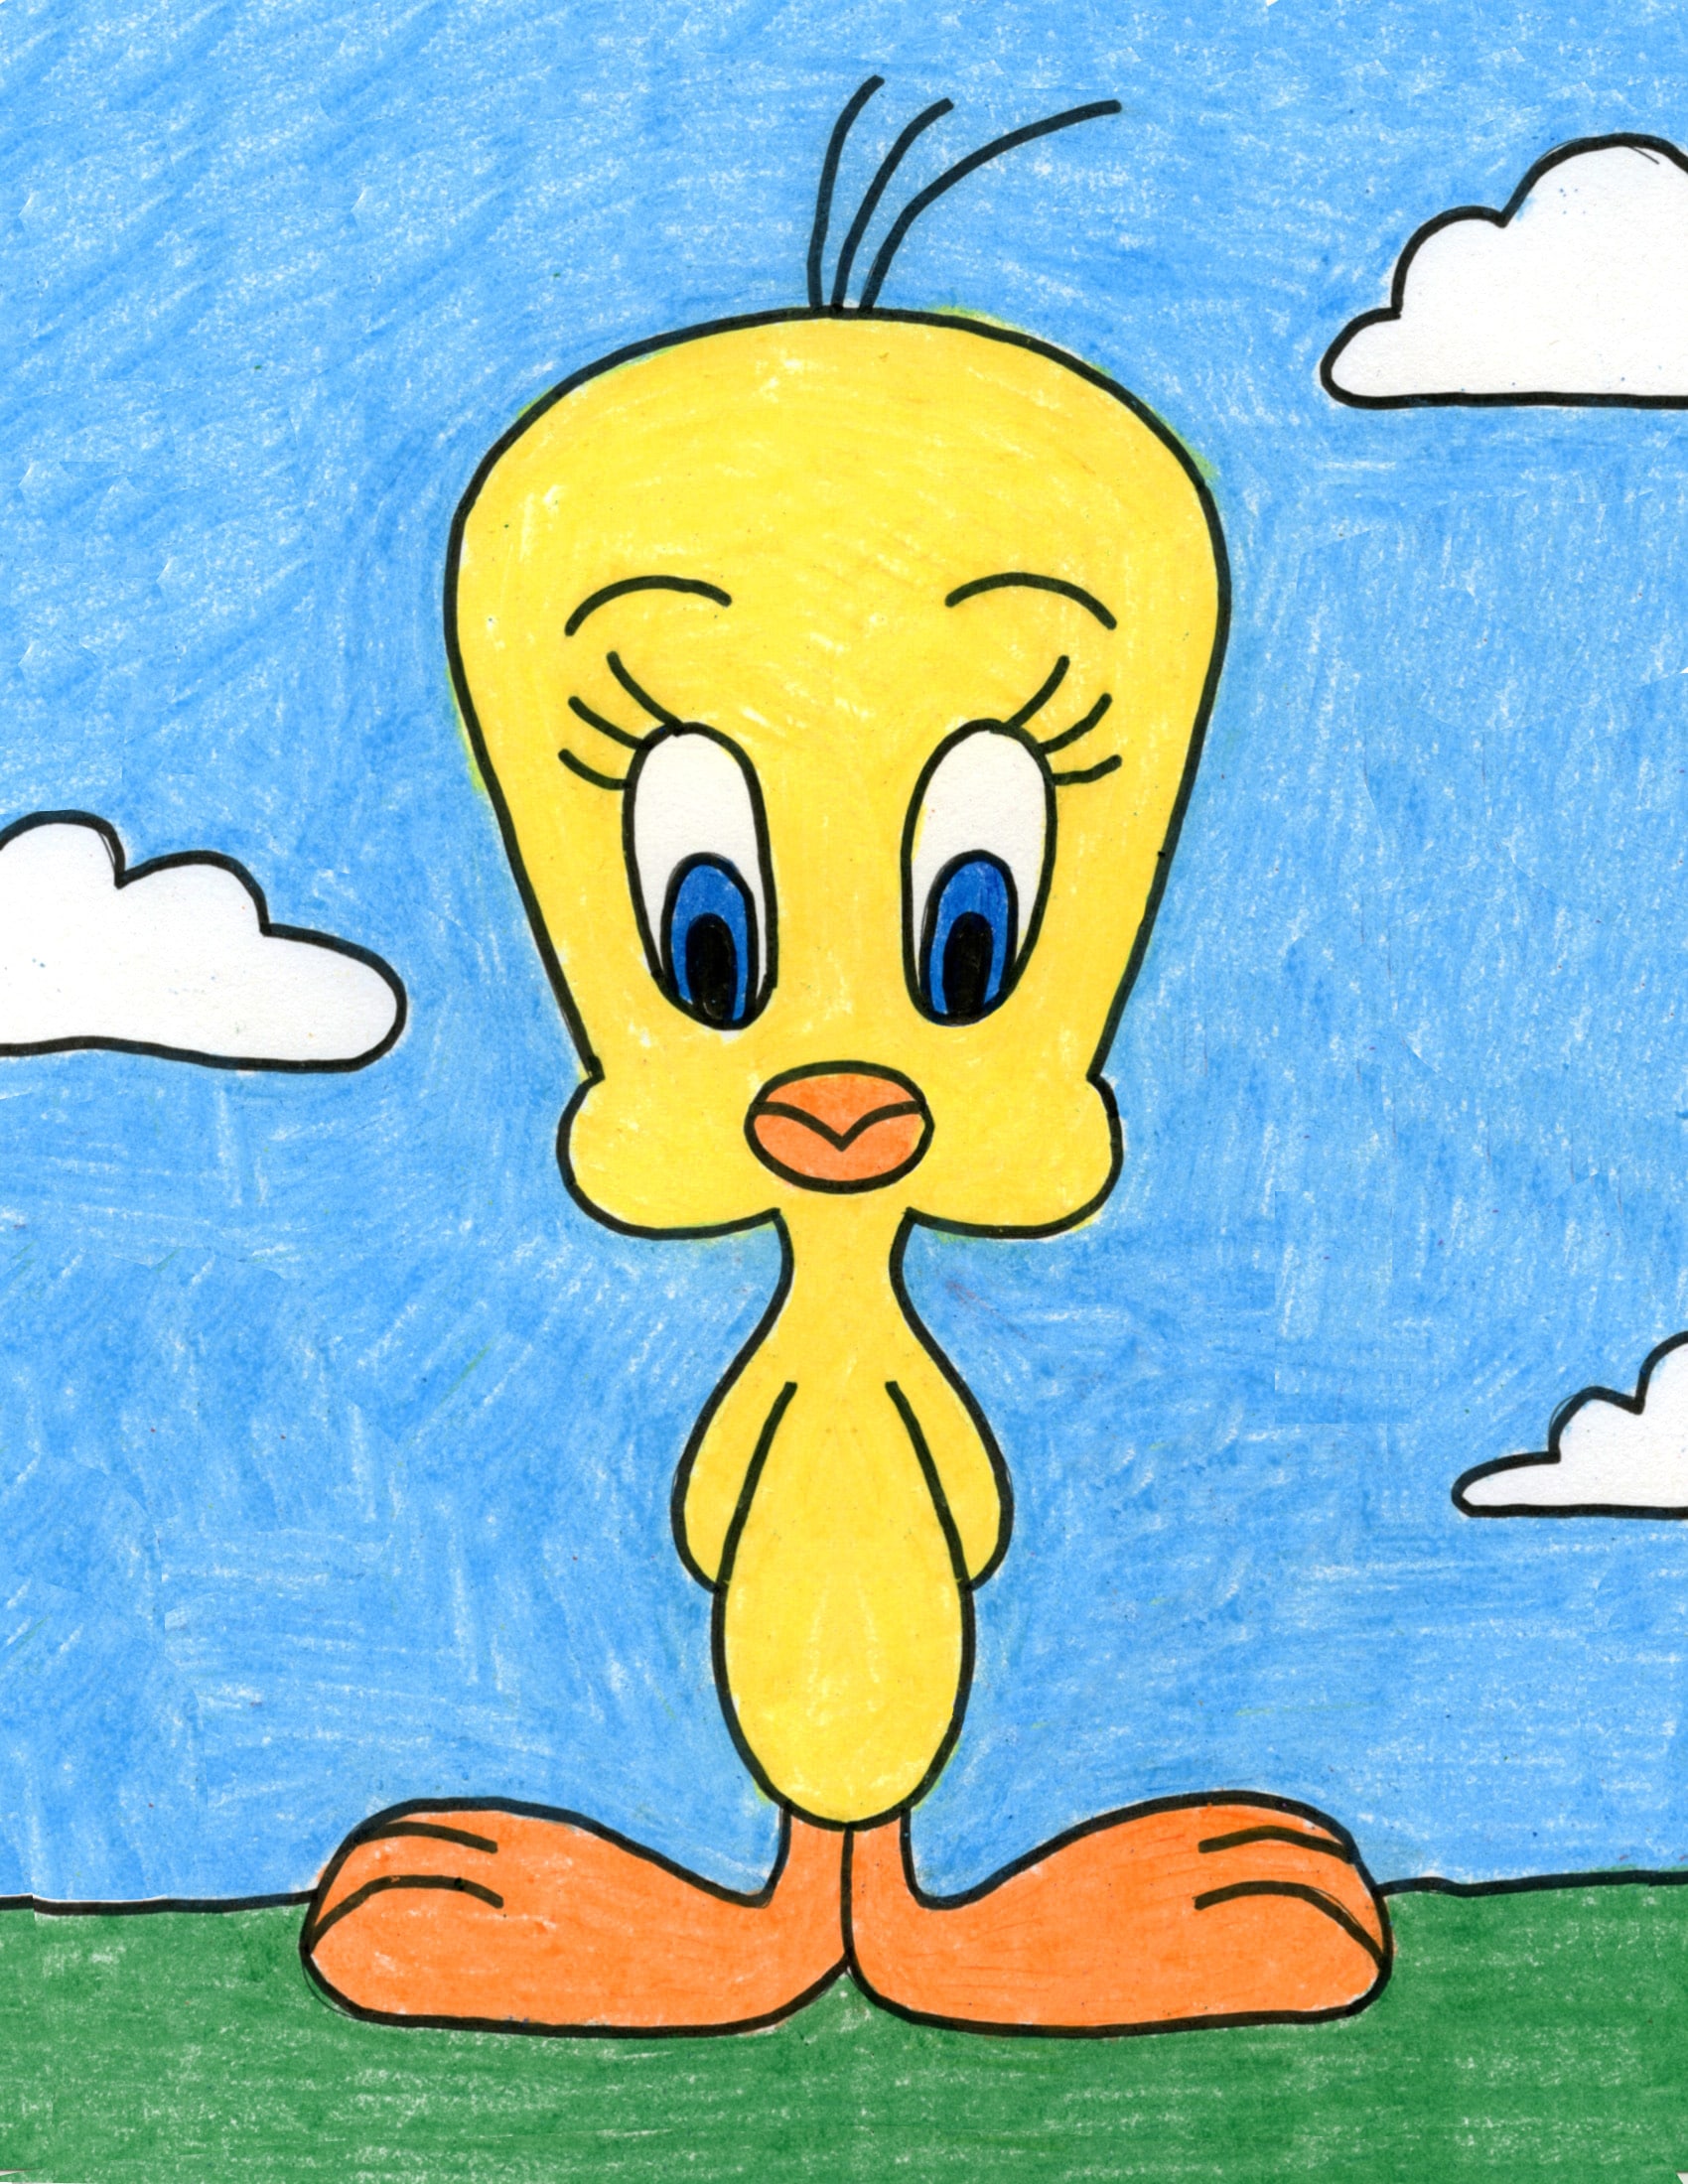 Easy How to Draw Tweety Bird Tutorial and a Tweety Bird Coloring Page